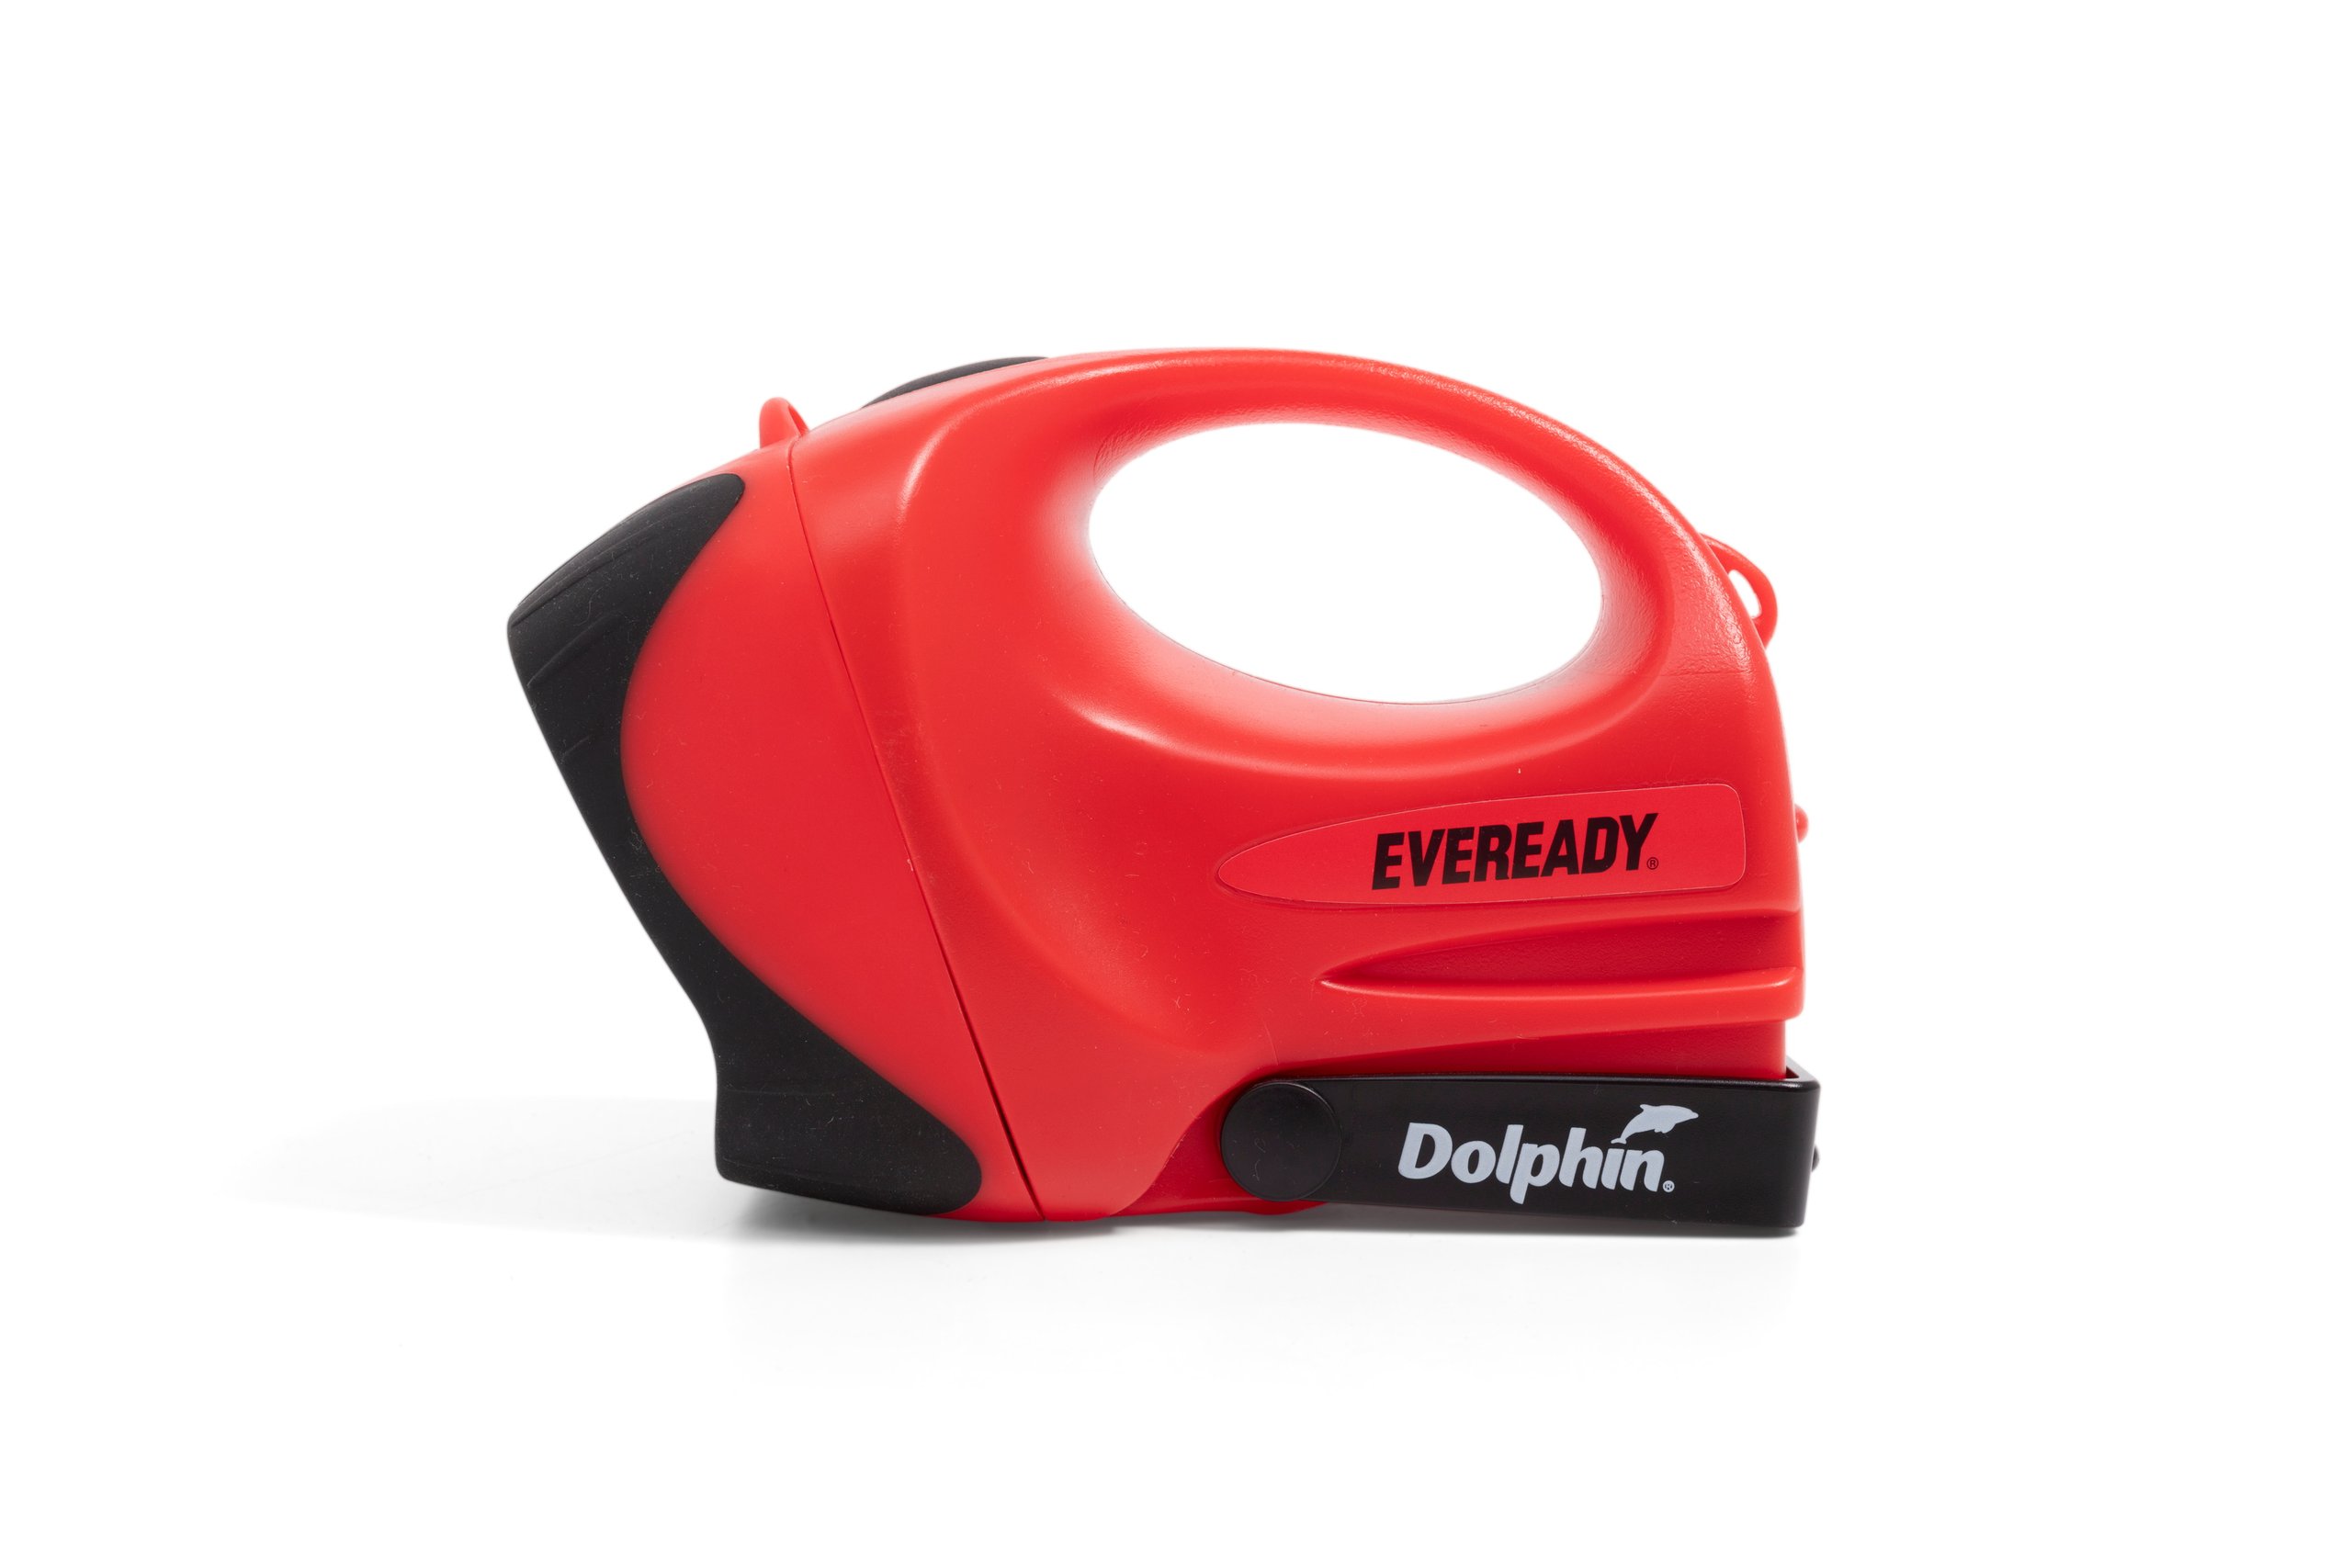 Eveready 'Dolphin Mk5' torch